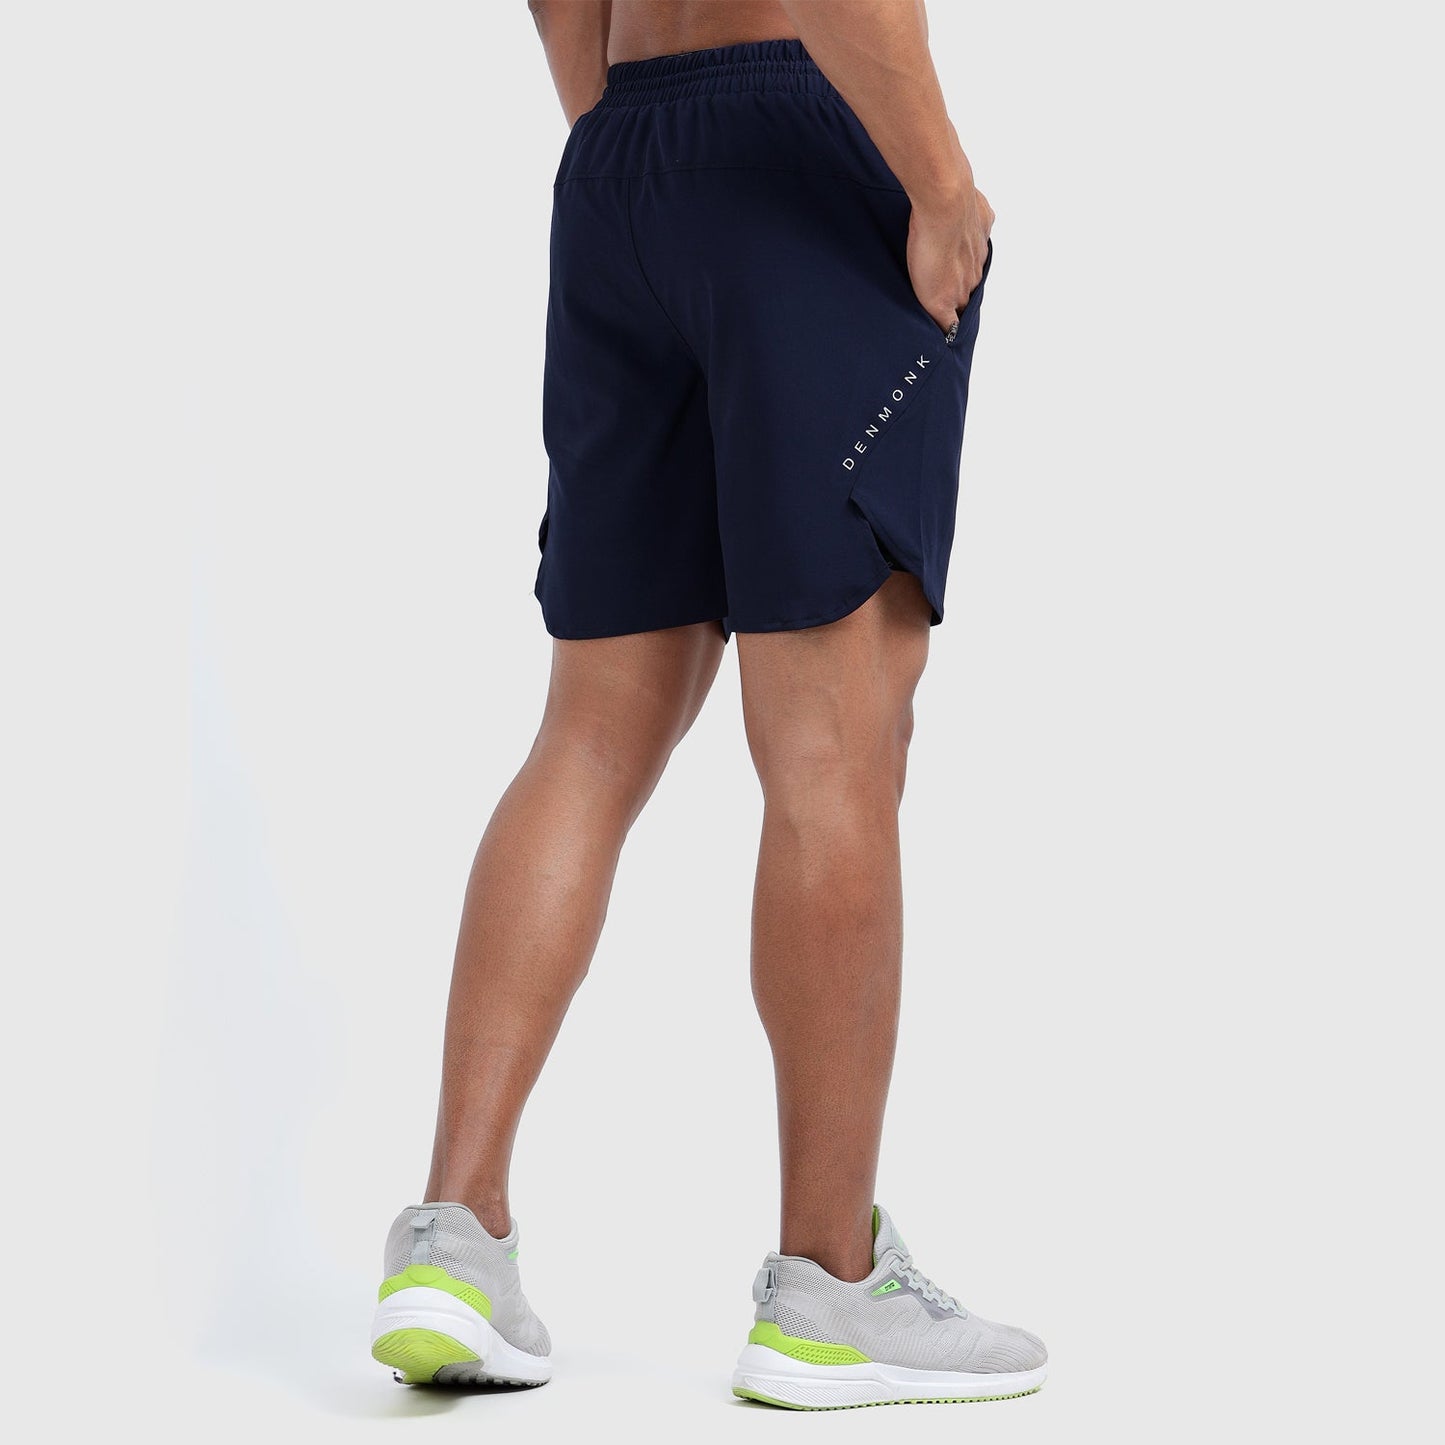 Denmonk's fashionable 2-IN-1 SHORTS midnight navy shorts for men will boost your level of gym fitness.